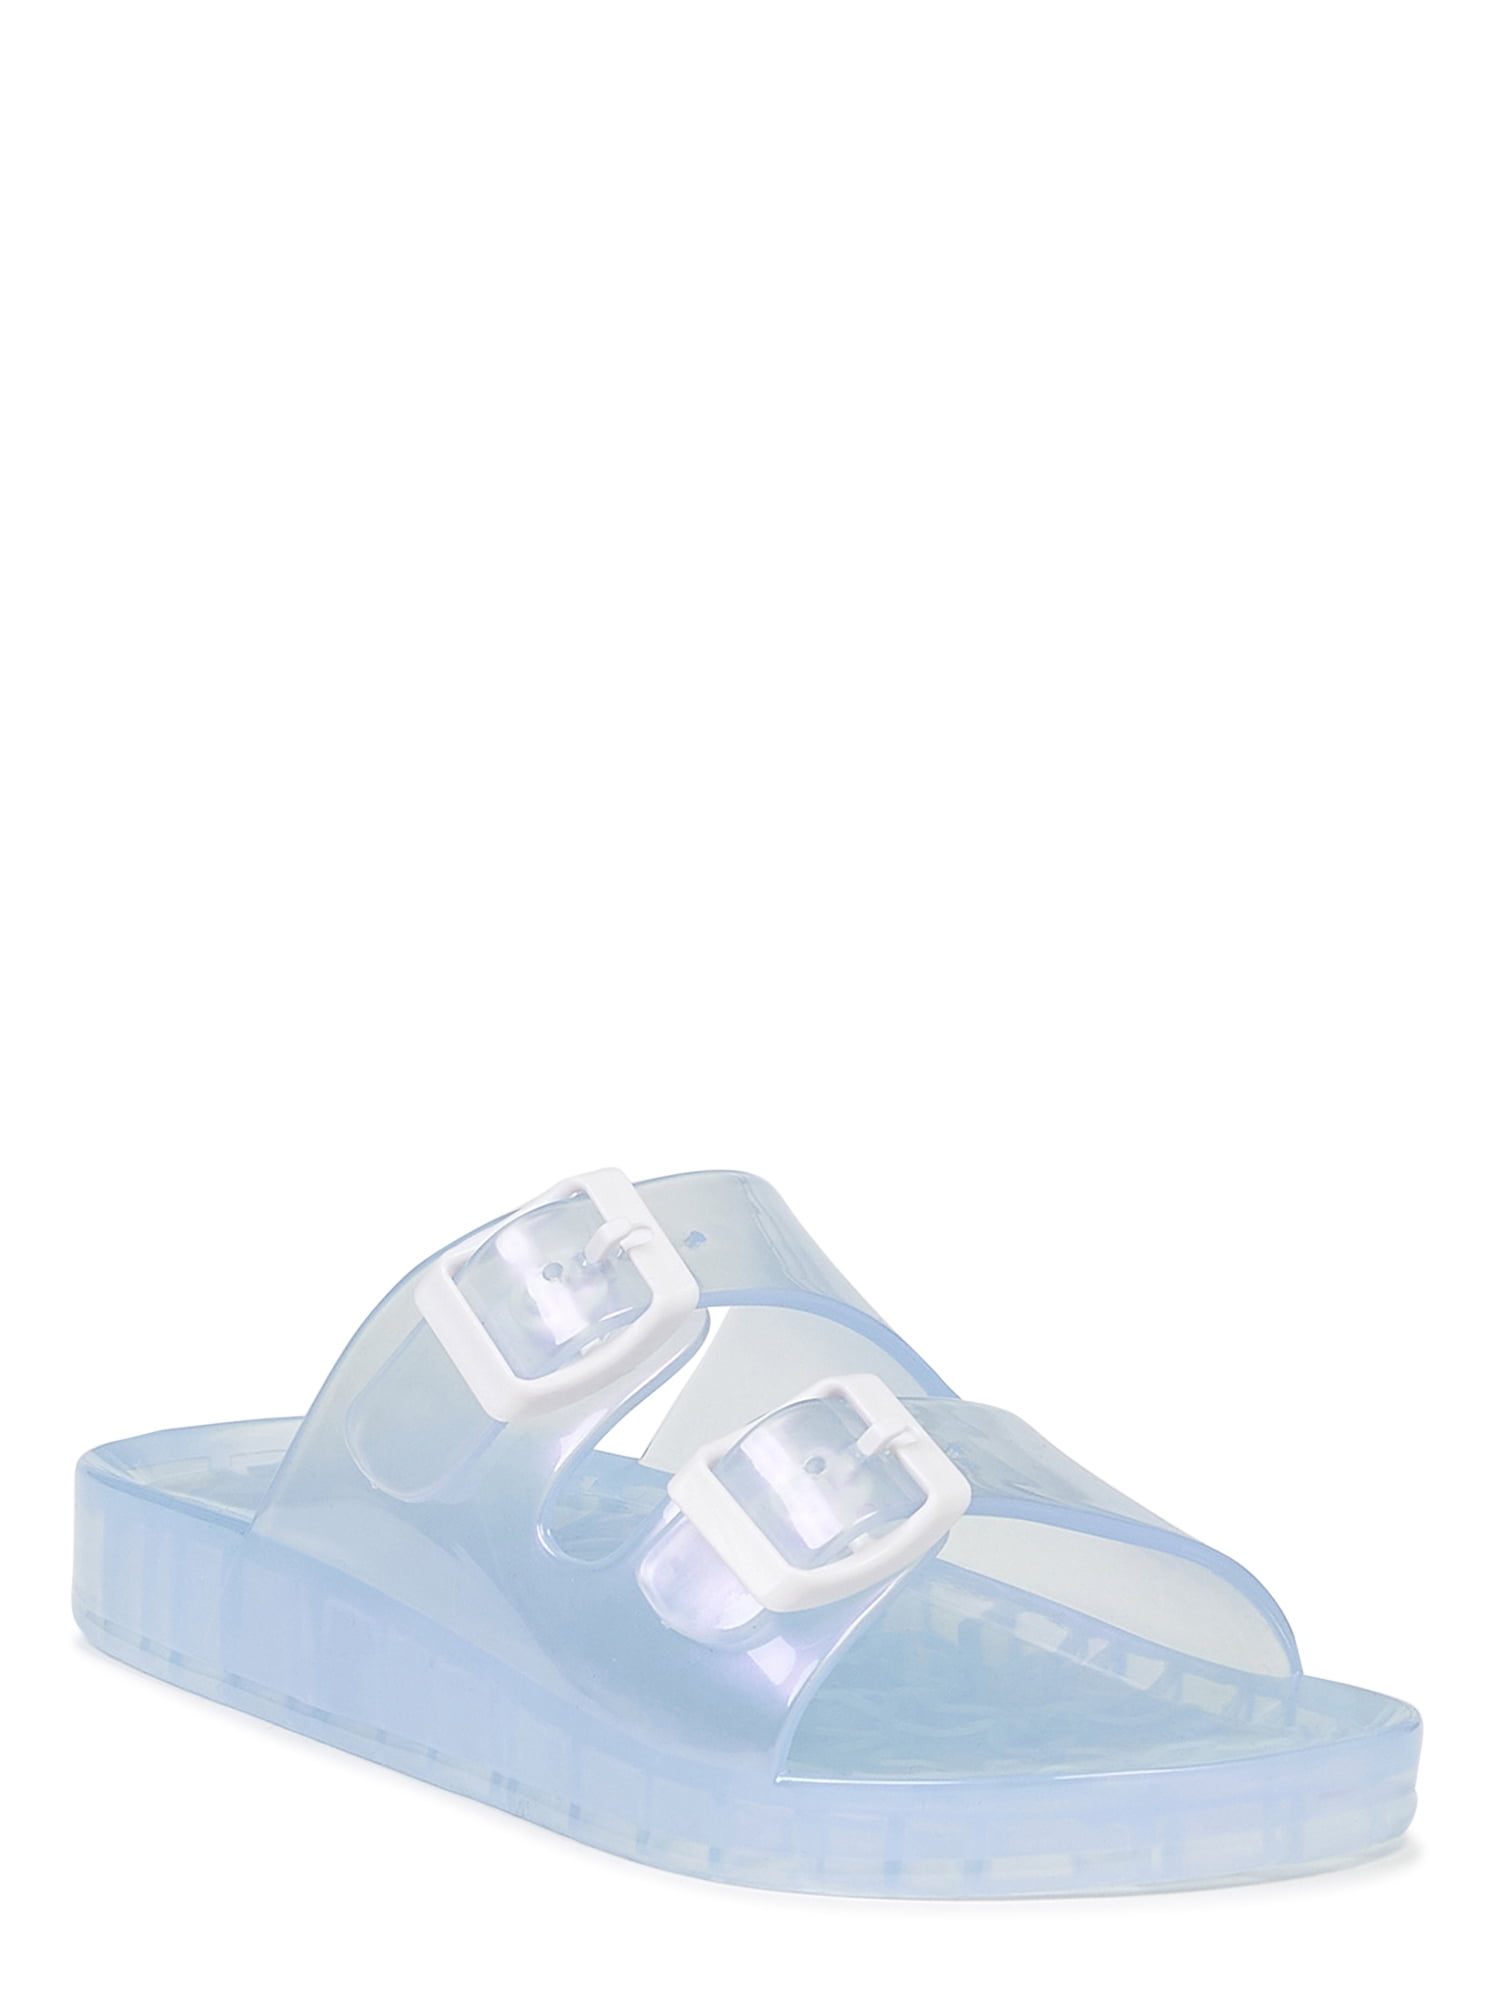 New Wonder Nation Toddler Girl's Jelly Sandals clear glitter size 2,3,4,5,6 